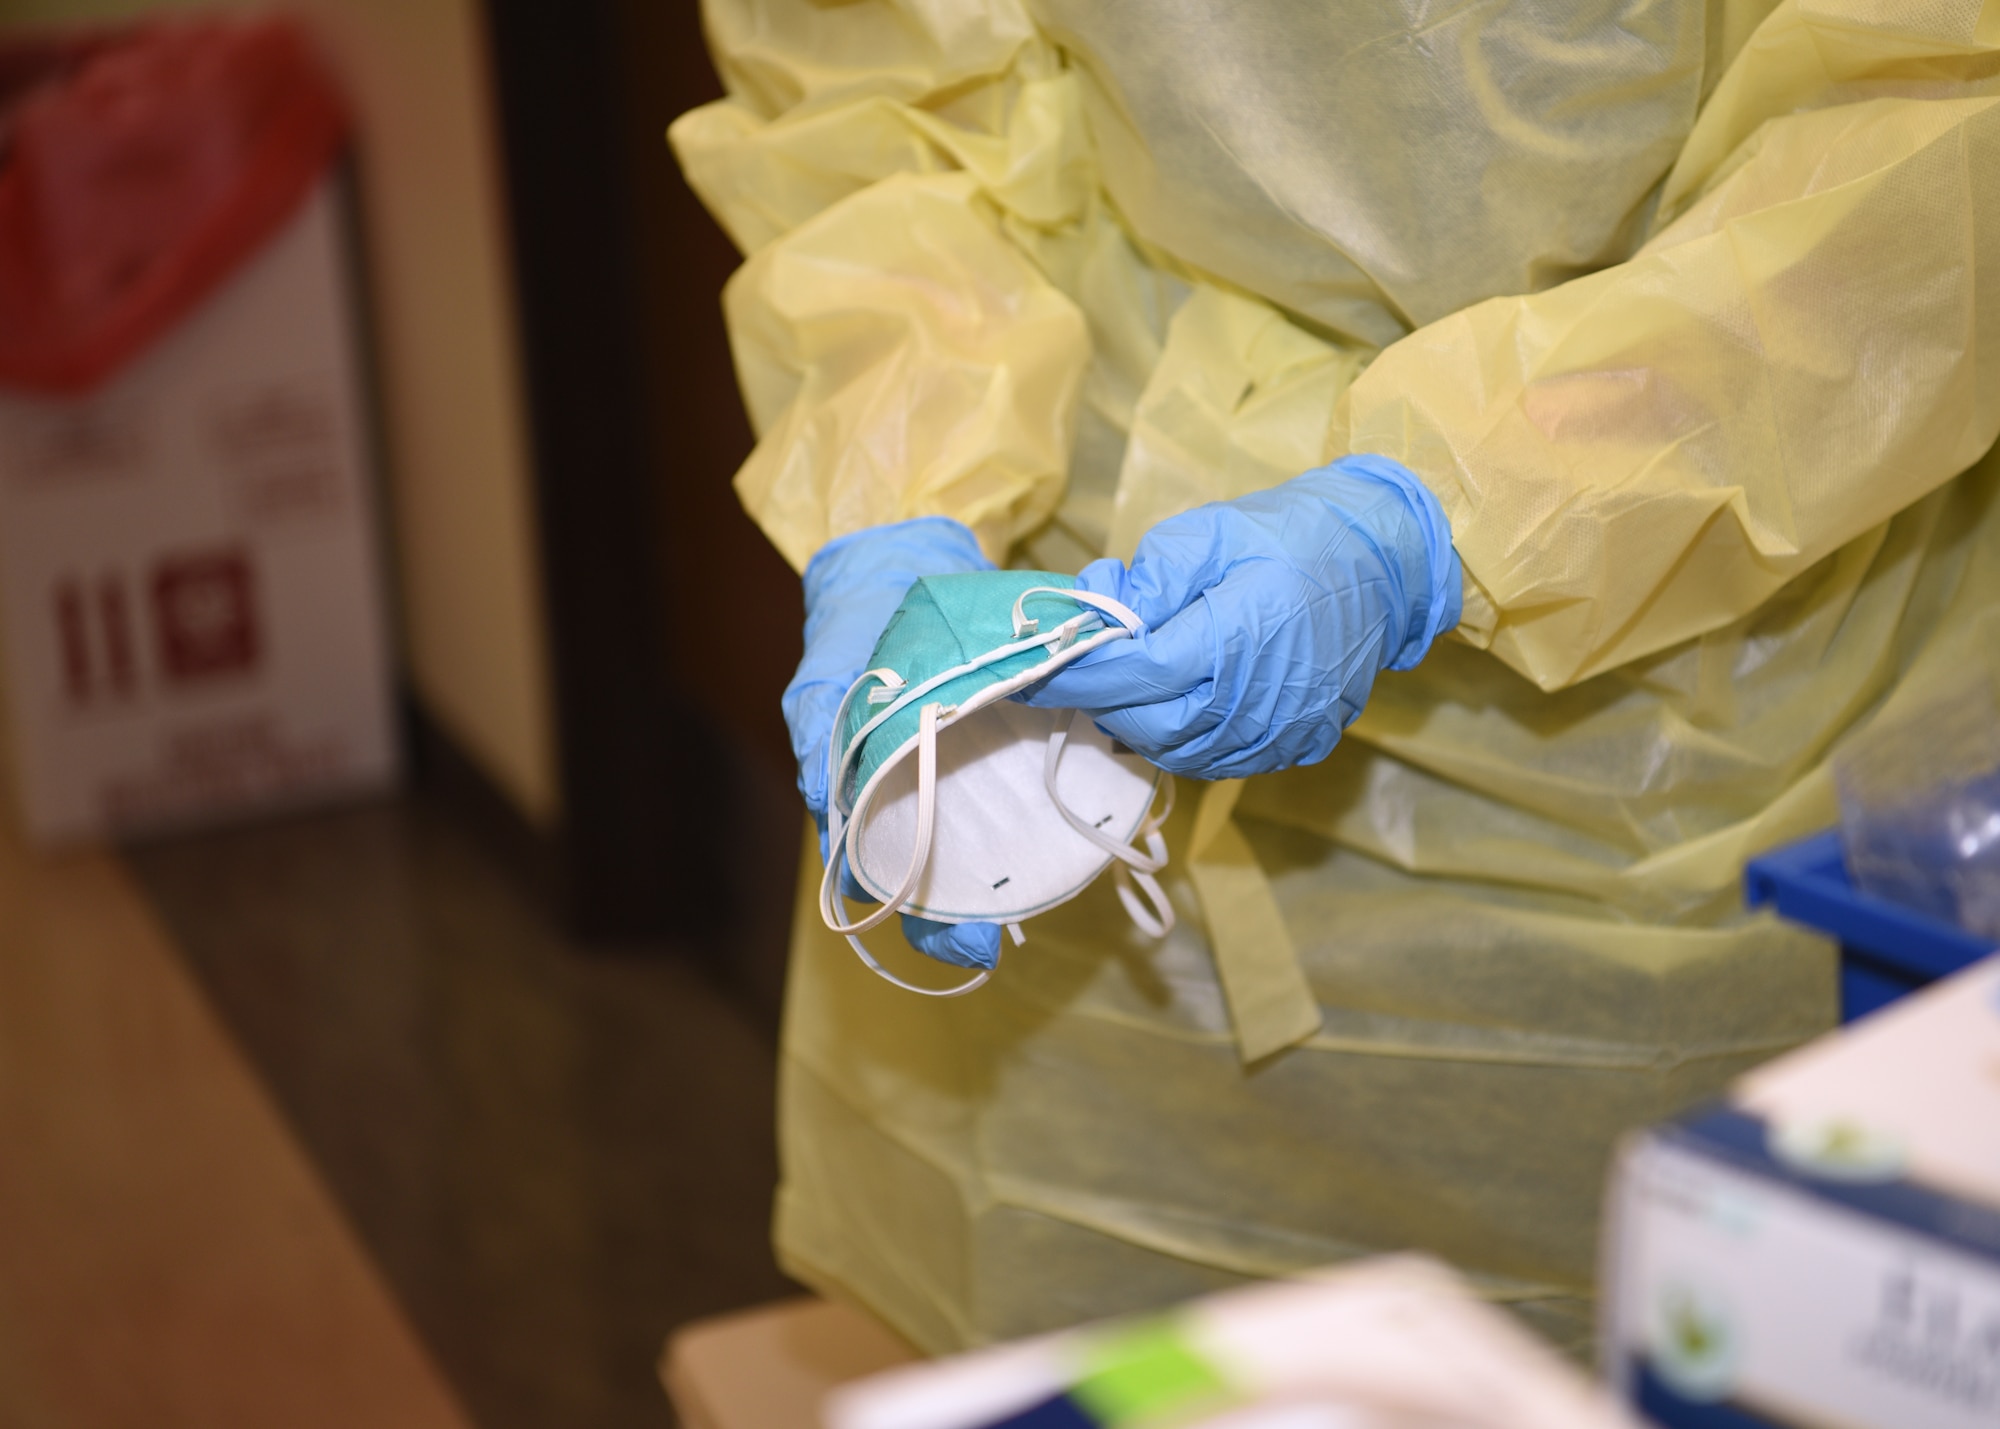 A member of the 17th Medical Group, separates two medical masks prior to a public health screening at the Ross Clinic on Goodfellow Air Force Base, Texas, March 25, 2020. Proper protective gear is mandatory during heightened exposure risks to COVID-19. (U.S. Air Force photo by Airman 1st Class Abbey Rieves)